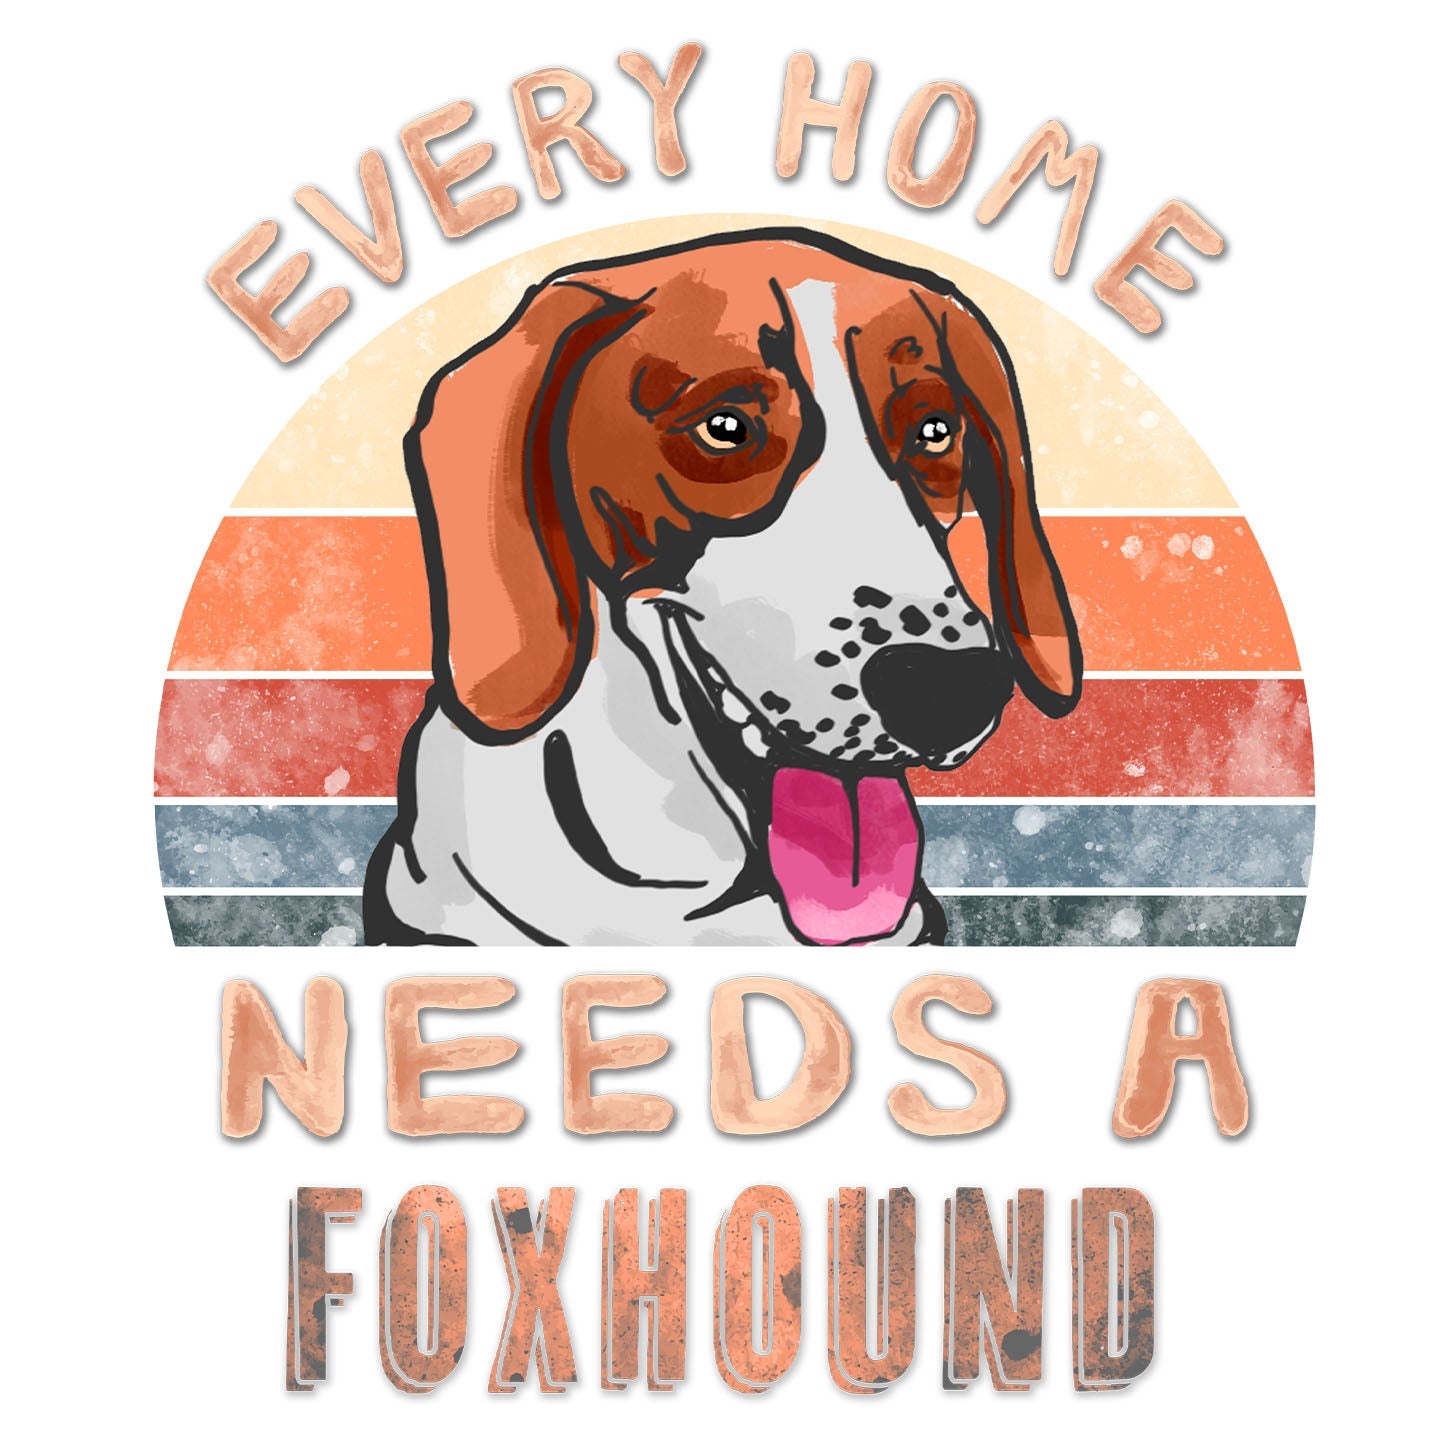 Every Home Needs a American Foxhound - Women's V-Neck T-Shirt